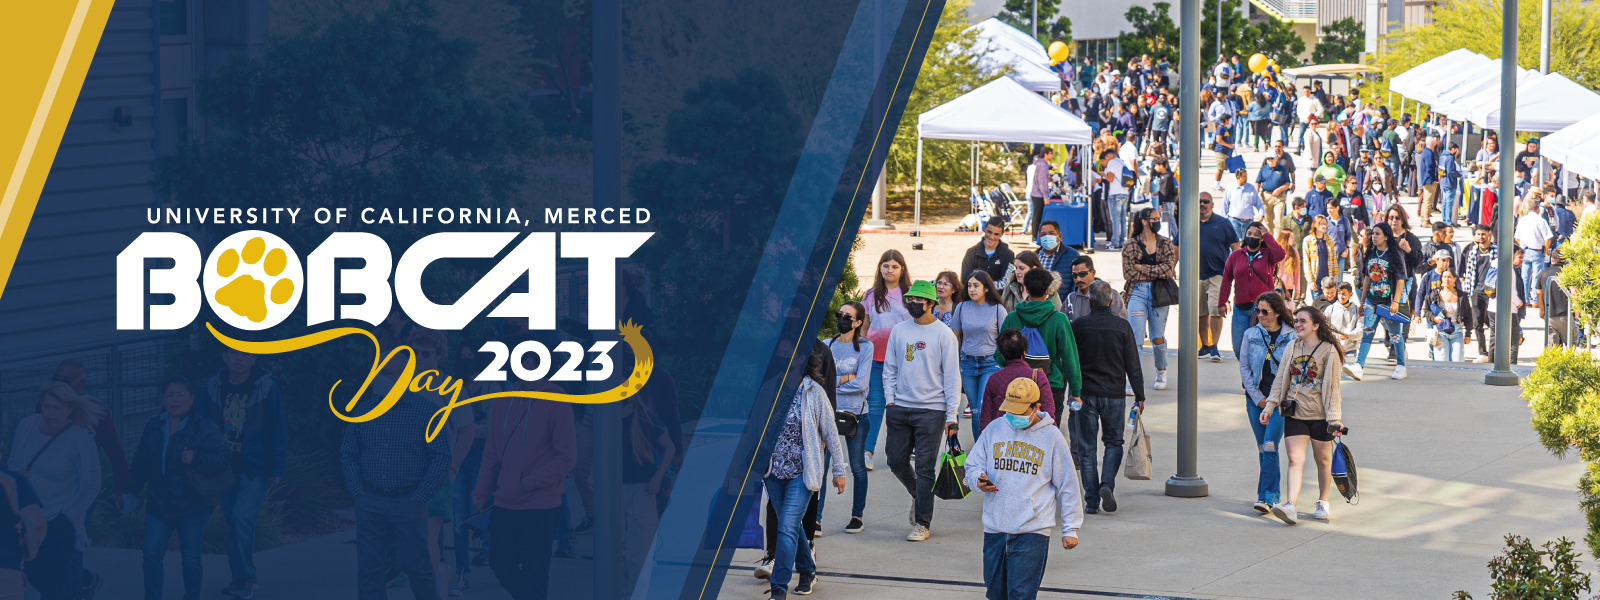 Bobcat Day 2022 - We'll see you there!